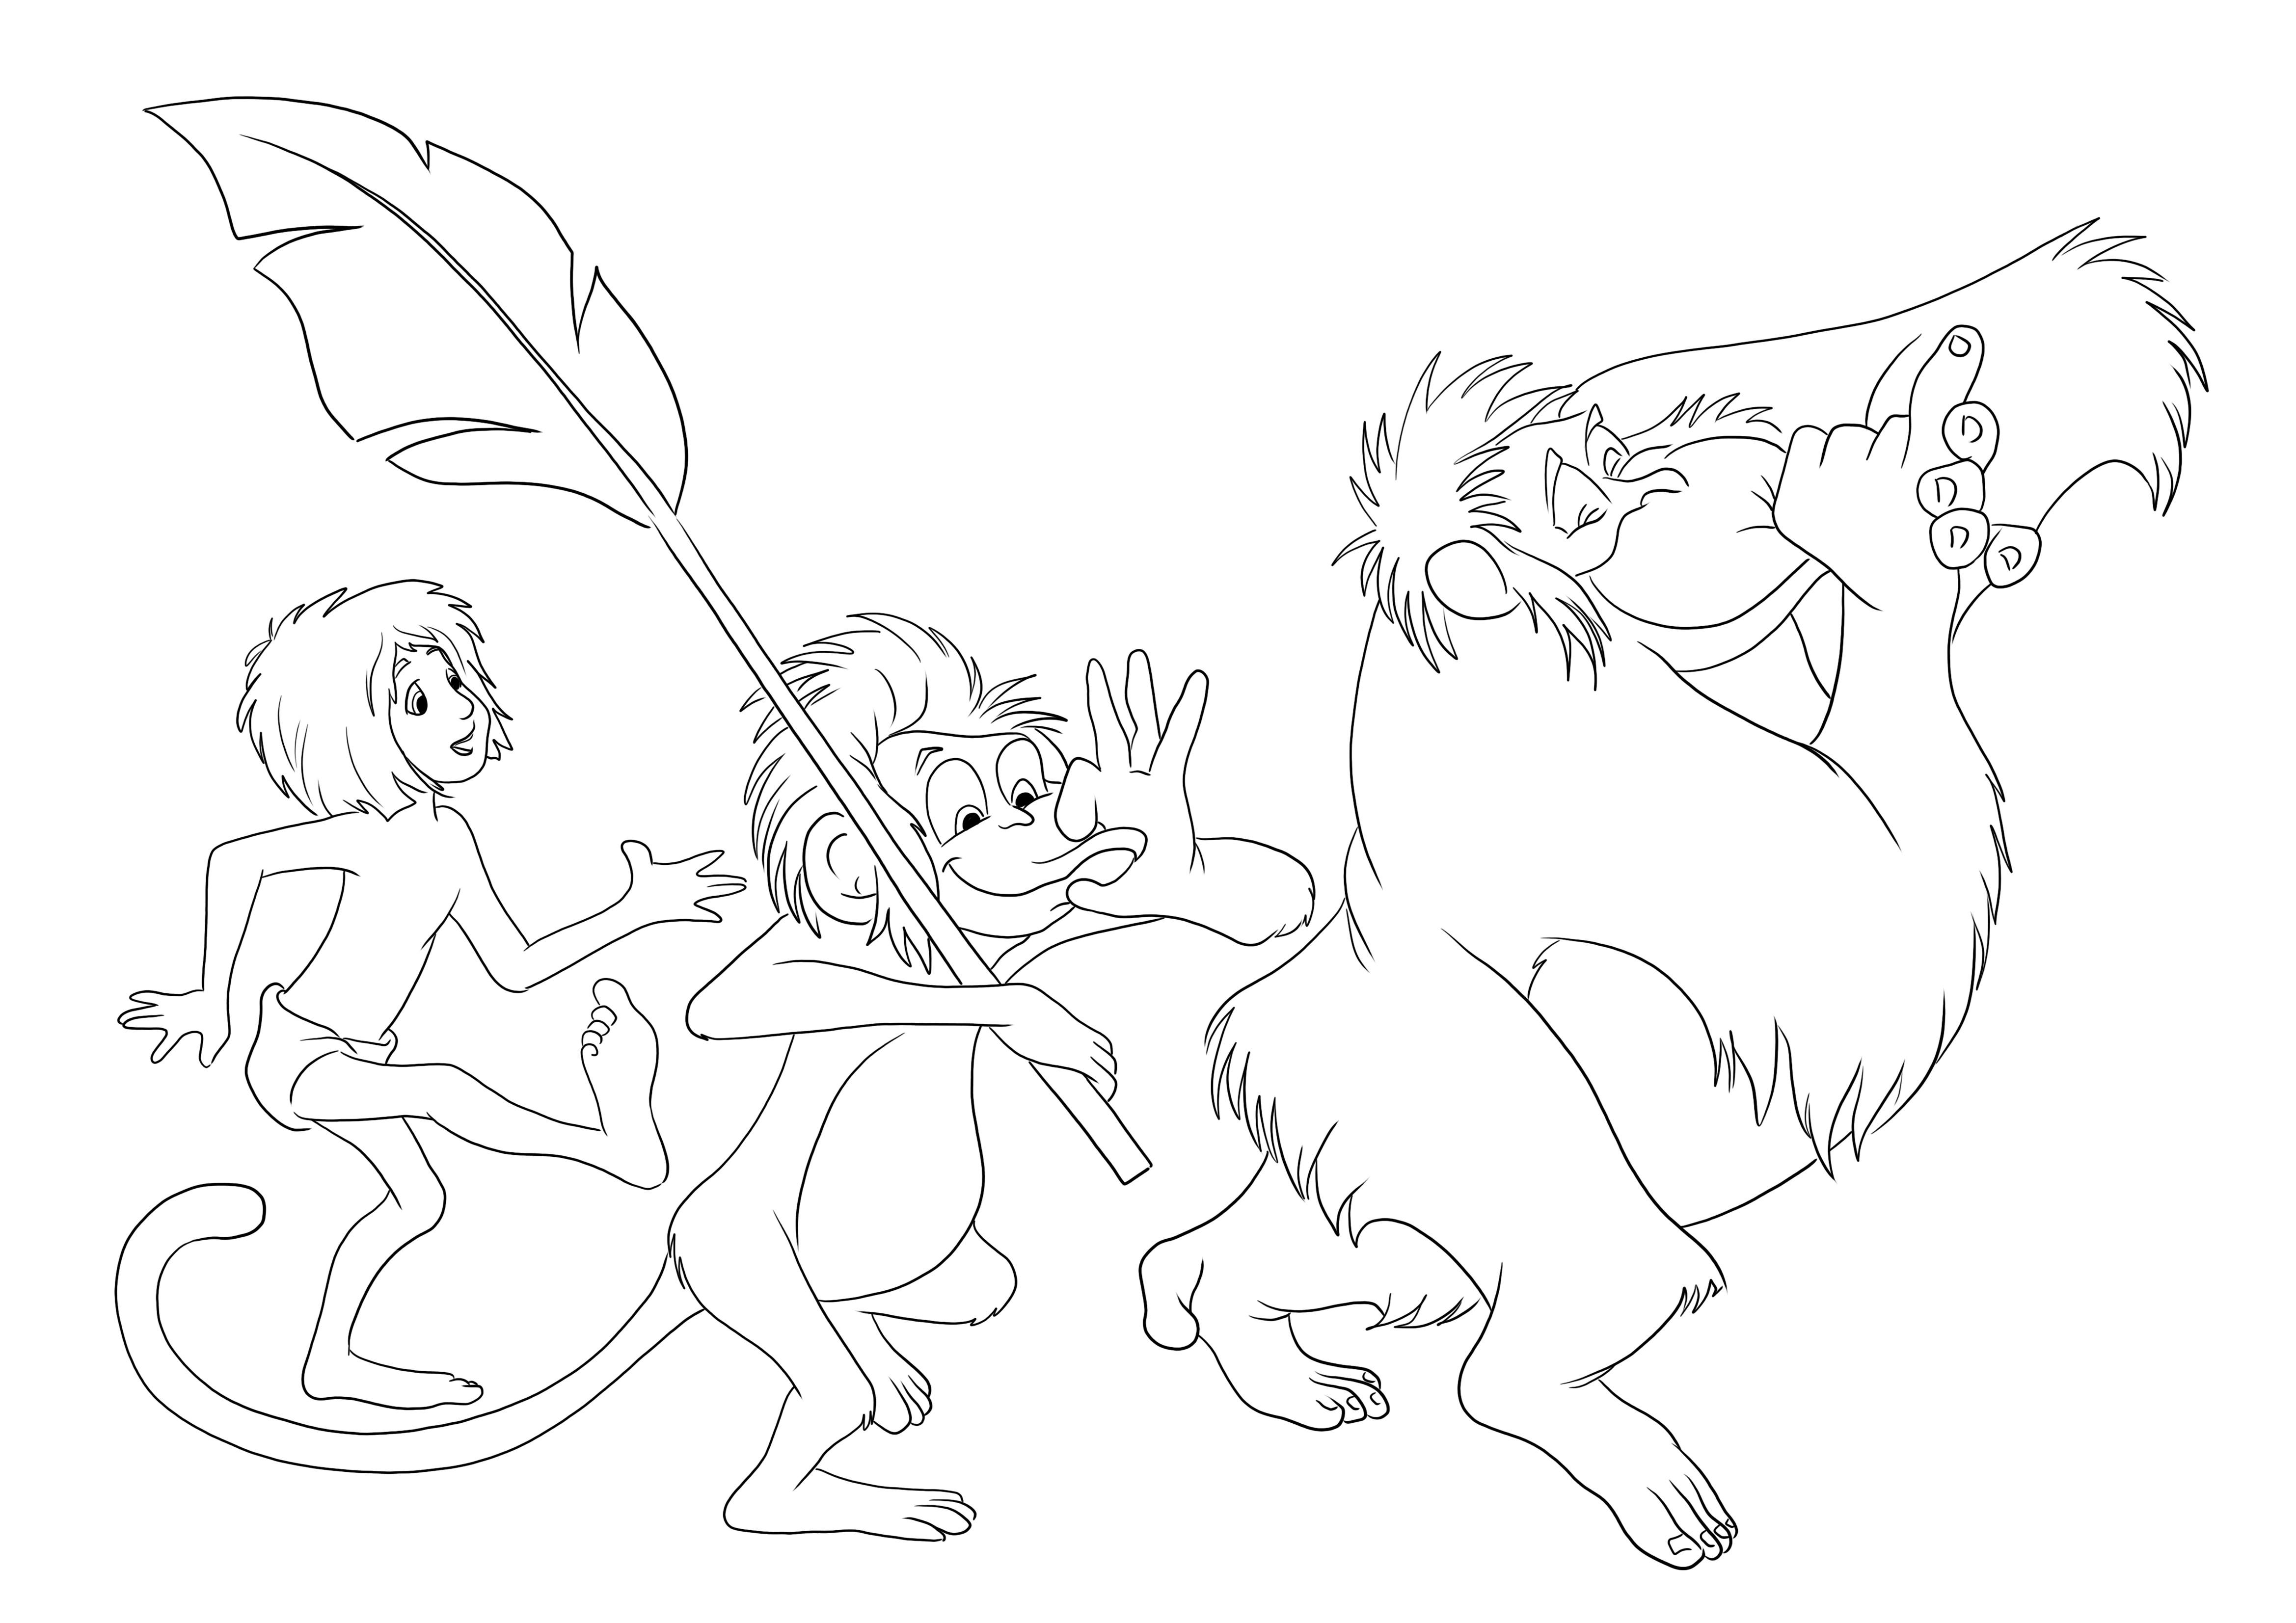 King Louie-Flunky Monkey-Mowgli for easy coloring and downloading